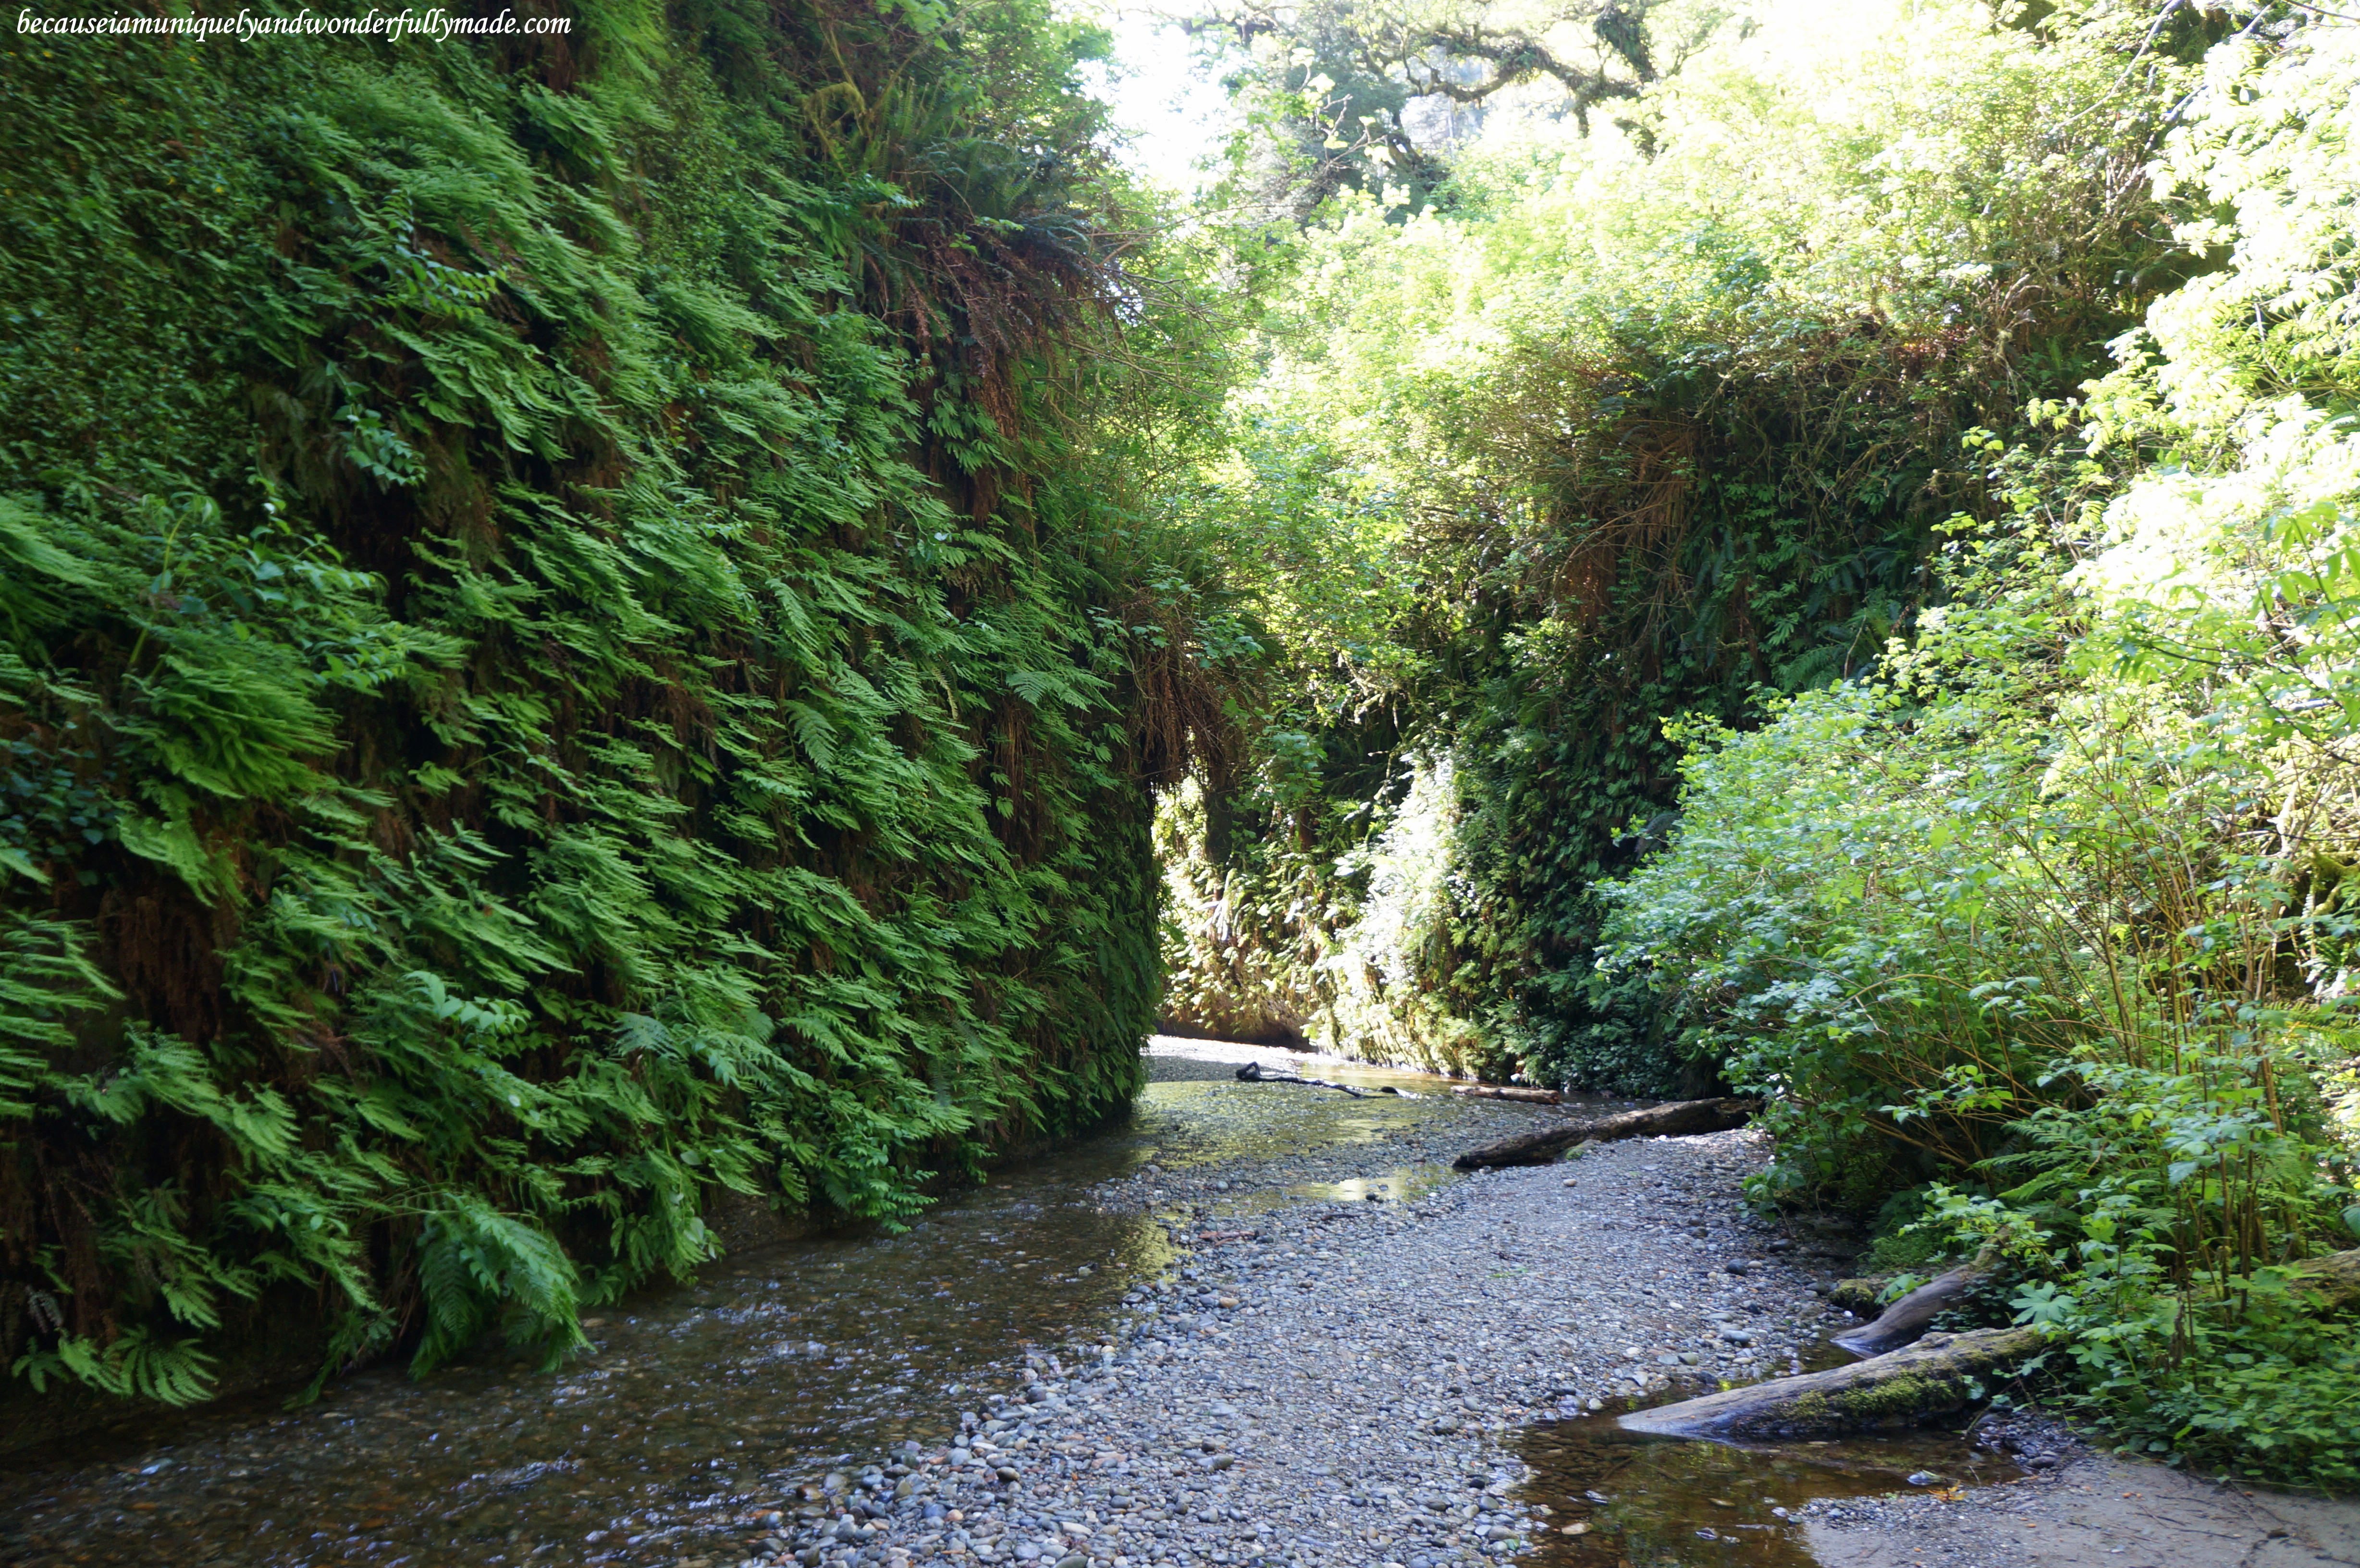 The 50-feet canyon walls at Fern Canyon is carpeted with ferns and moss that can be traced to be over 300 million years old.